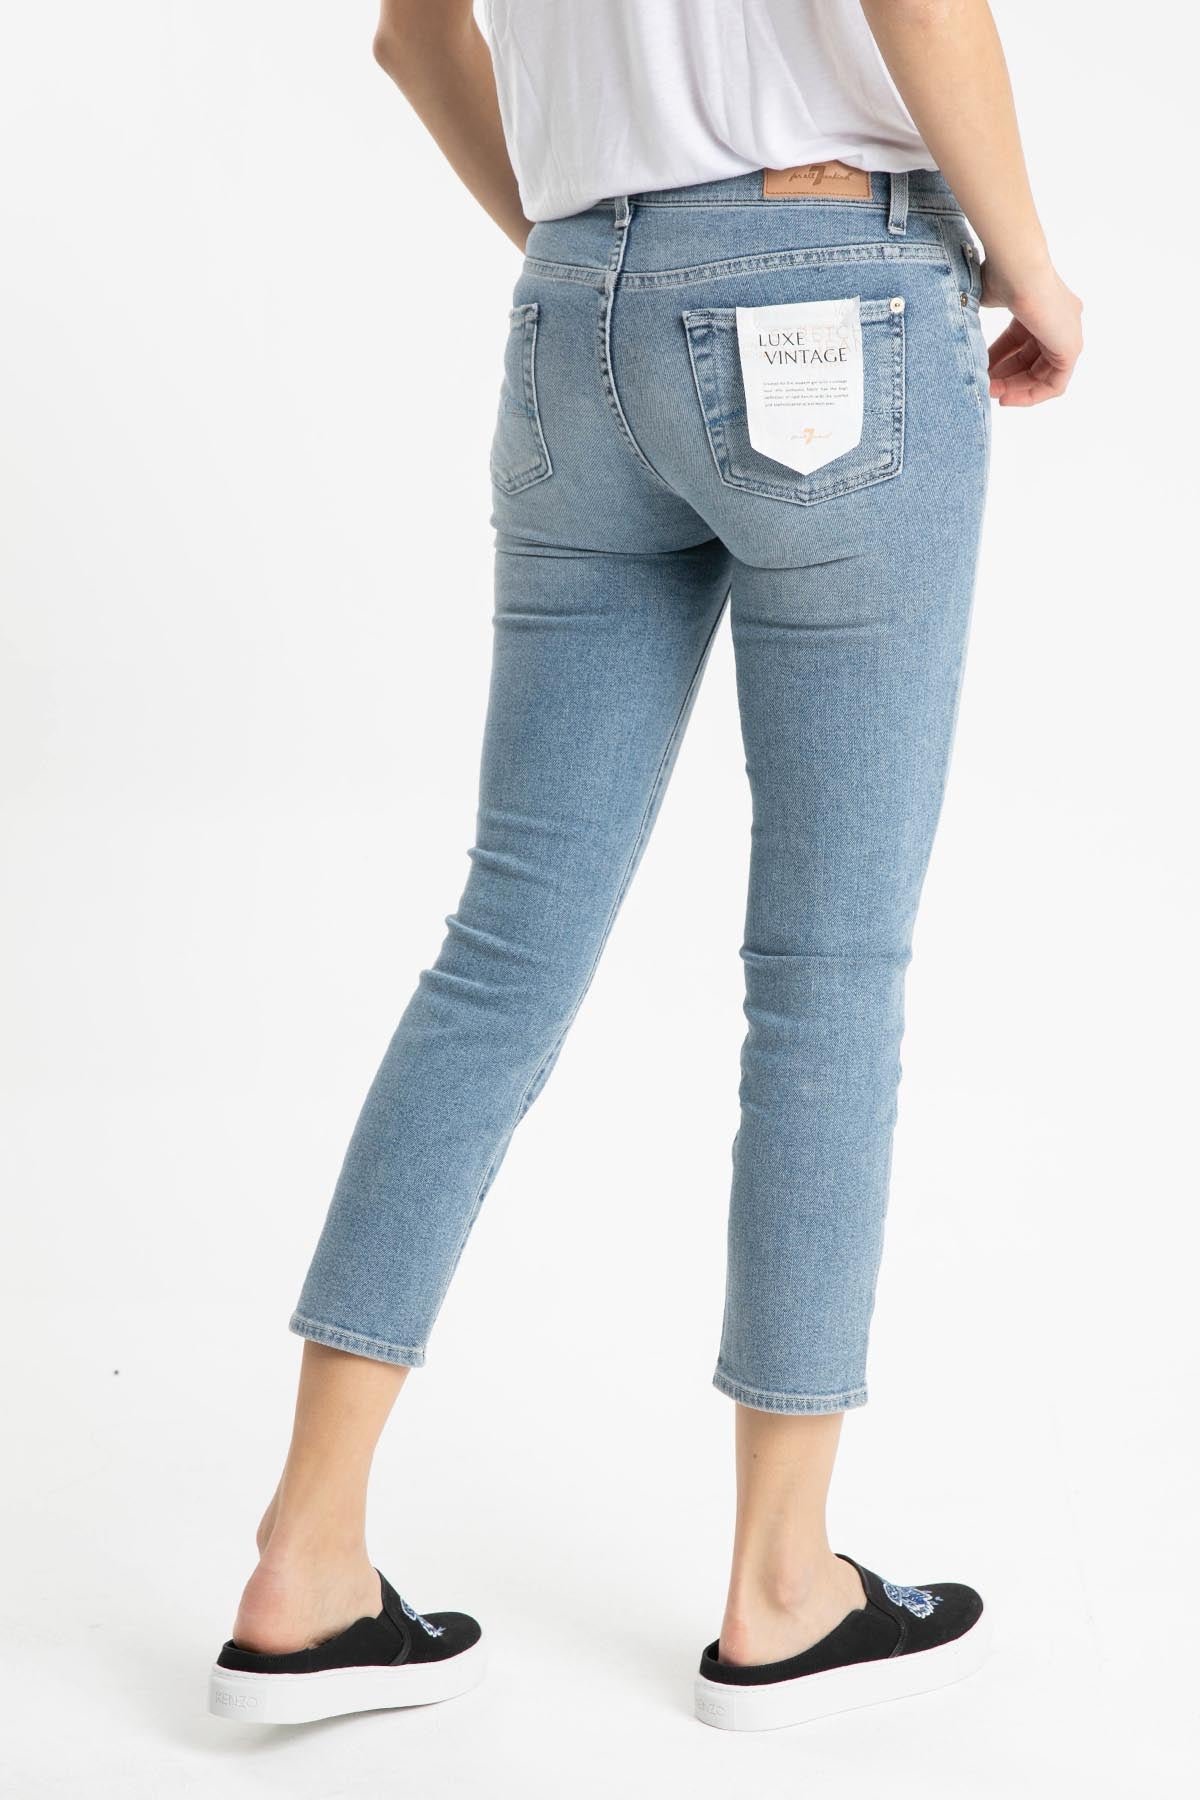 7 For All Mankind Luxe Vintage Stretch Jeans-Libas Trendy Fashion Store